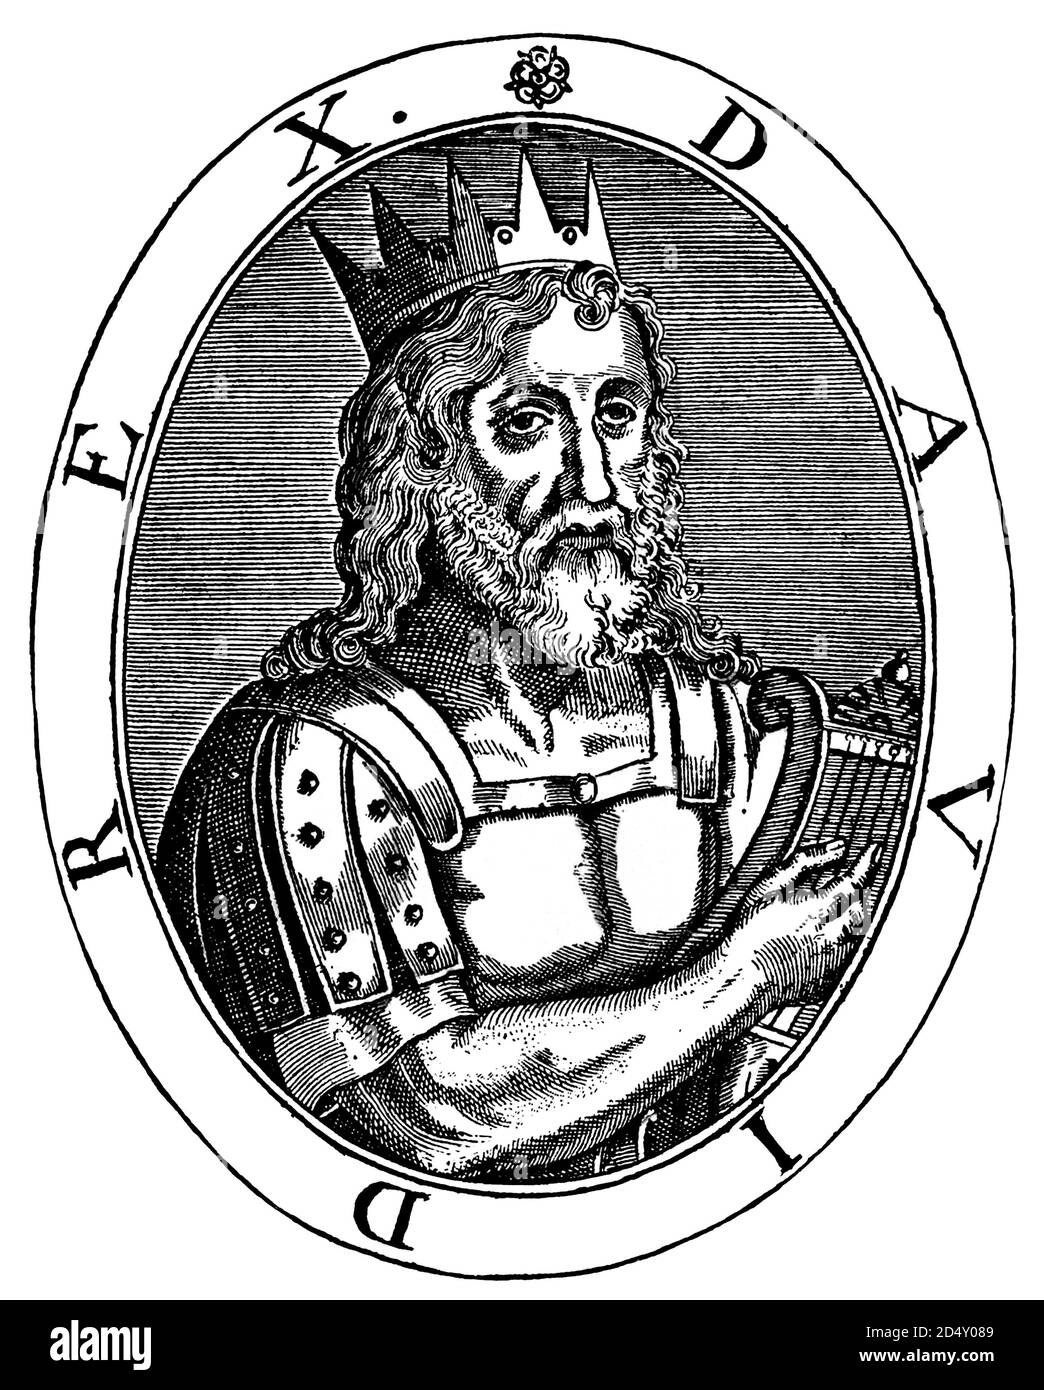 970 BCE , ISRAELE : The jewish KING DAVID ( 1010 c.- 970 BC ), author of psalms . Is described in the Hebrew Bible as the 3th king of the United Monarchy of Israel and Judah . Engraving portrait by unknown, XVIII century. Jesus Christ is described as being descended from David in the Gospels of Matthew and Luke . - NOBILITY - NOBILI - RE DAVIDE - ISRAELE - EBREO - POPOLO EBRAICO - illustrazione - illustration - engraving - incisione - corona - crown - beard - barba - lira - SALMI - PREGHIERA - RELIGION - RELIGIONE - PRAY - POESIA - POEMA - POEMS - POETRY - POETA --- ARCHIVIO GBB Stock Photo